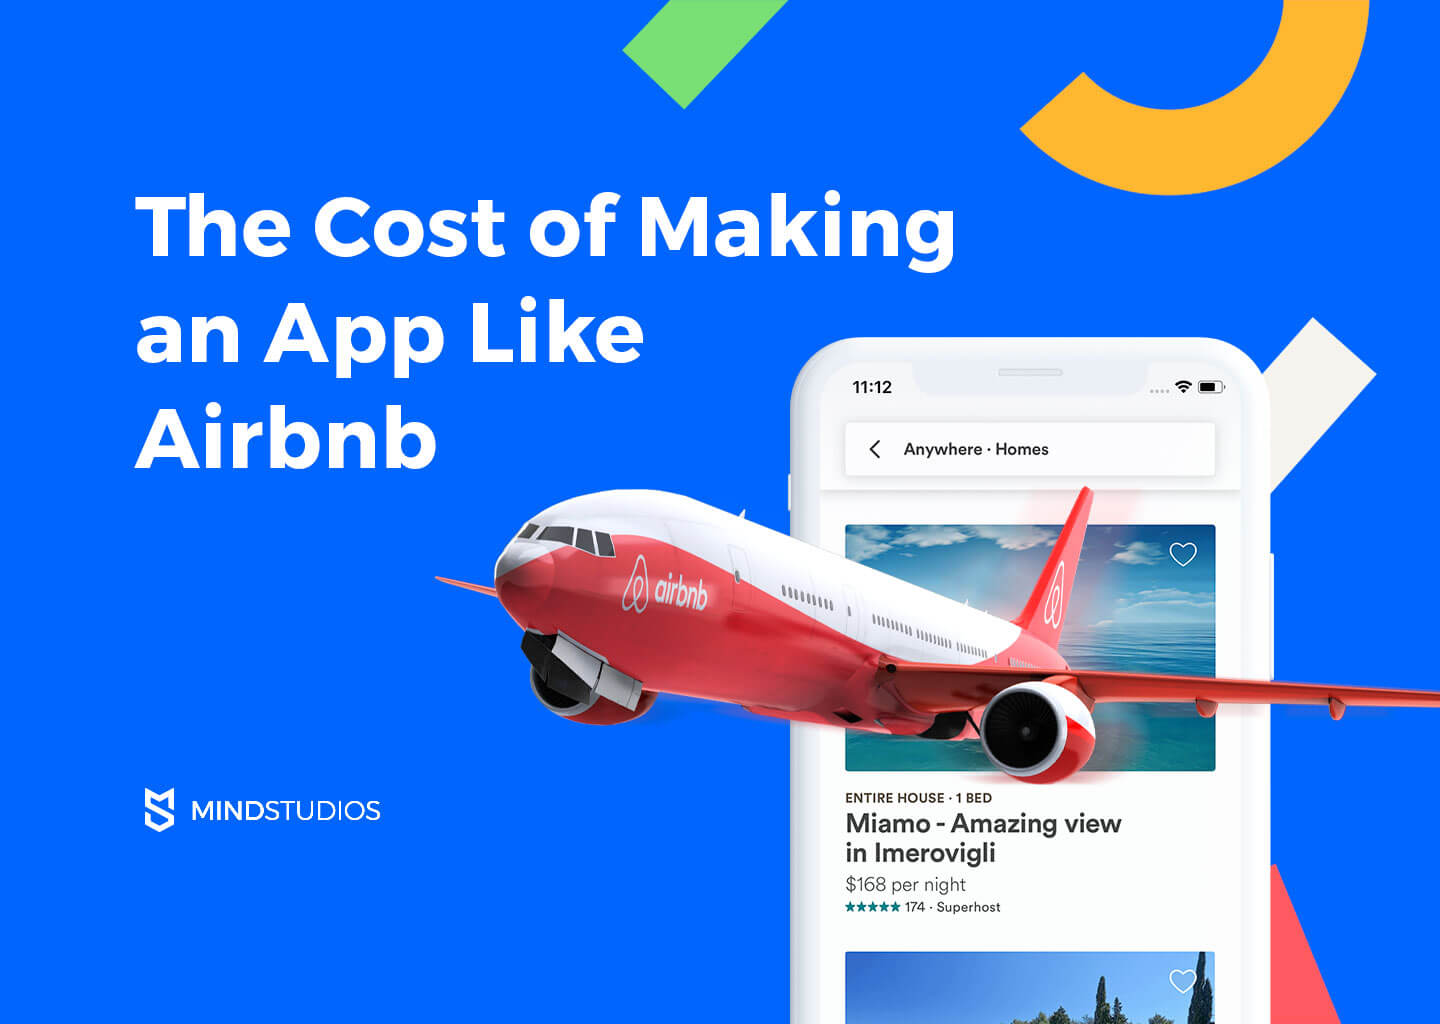 airbnb startup cost